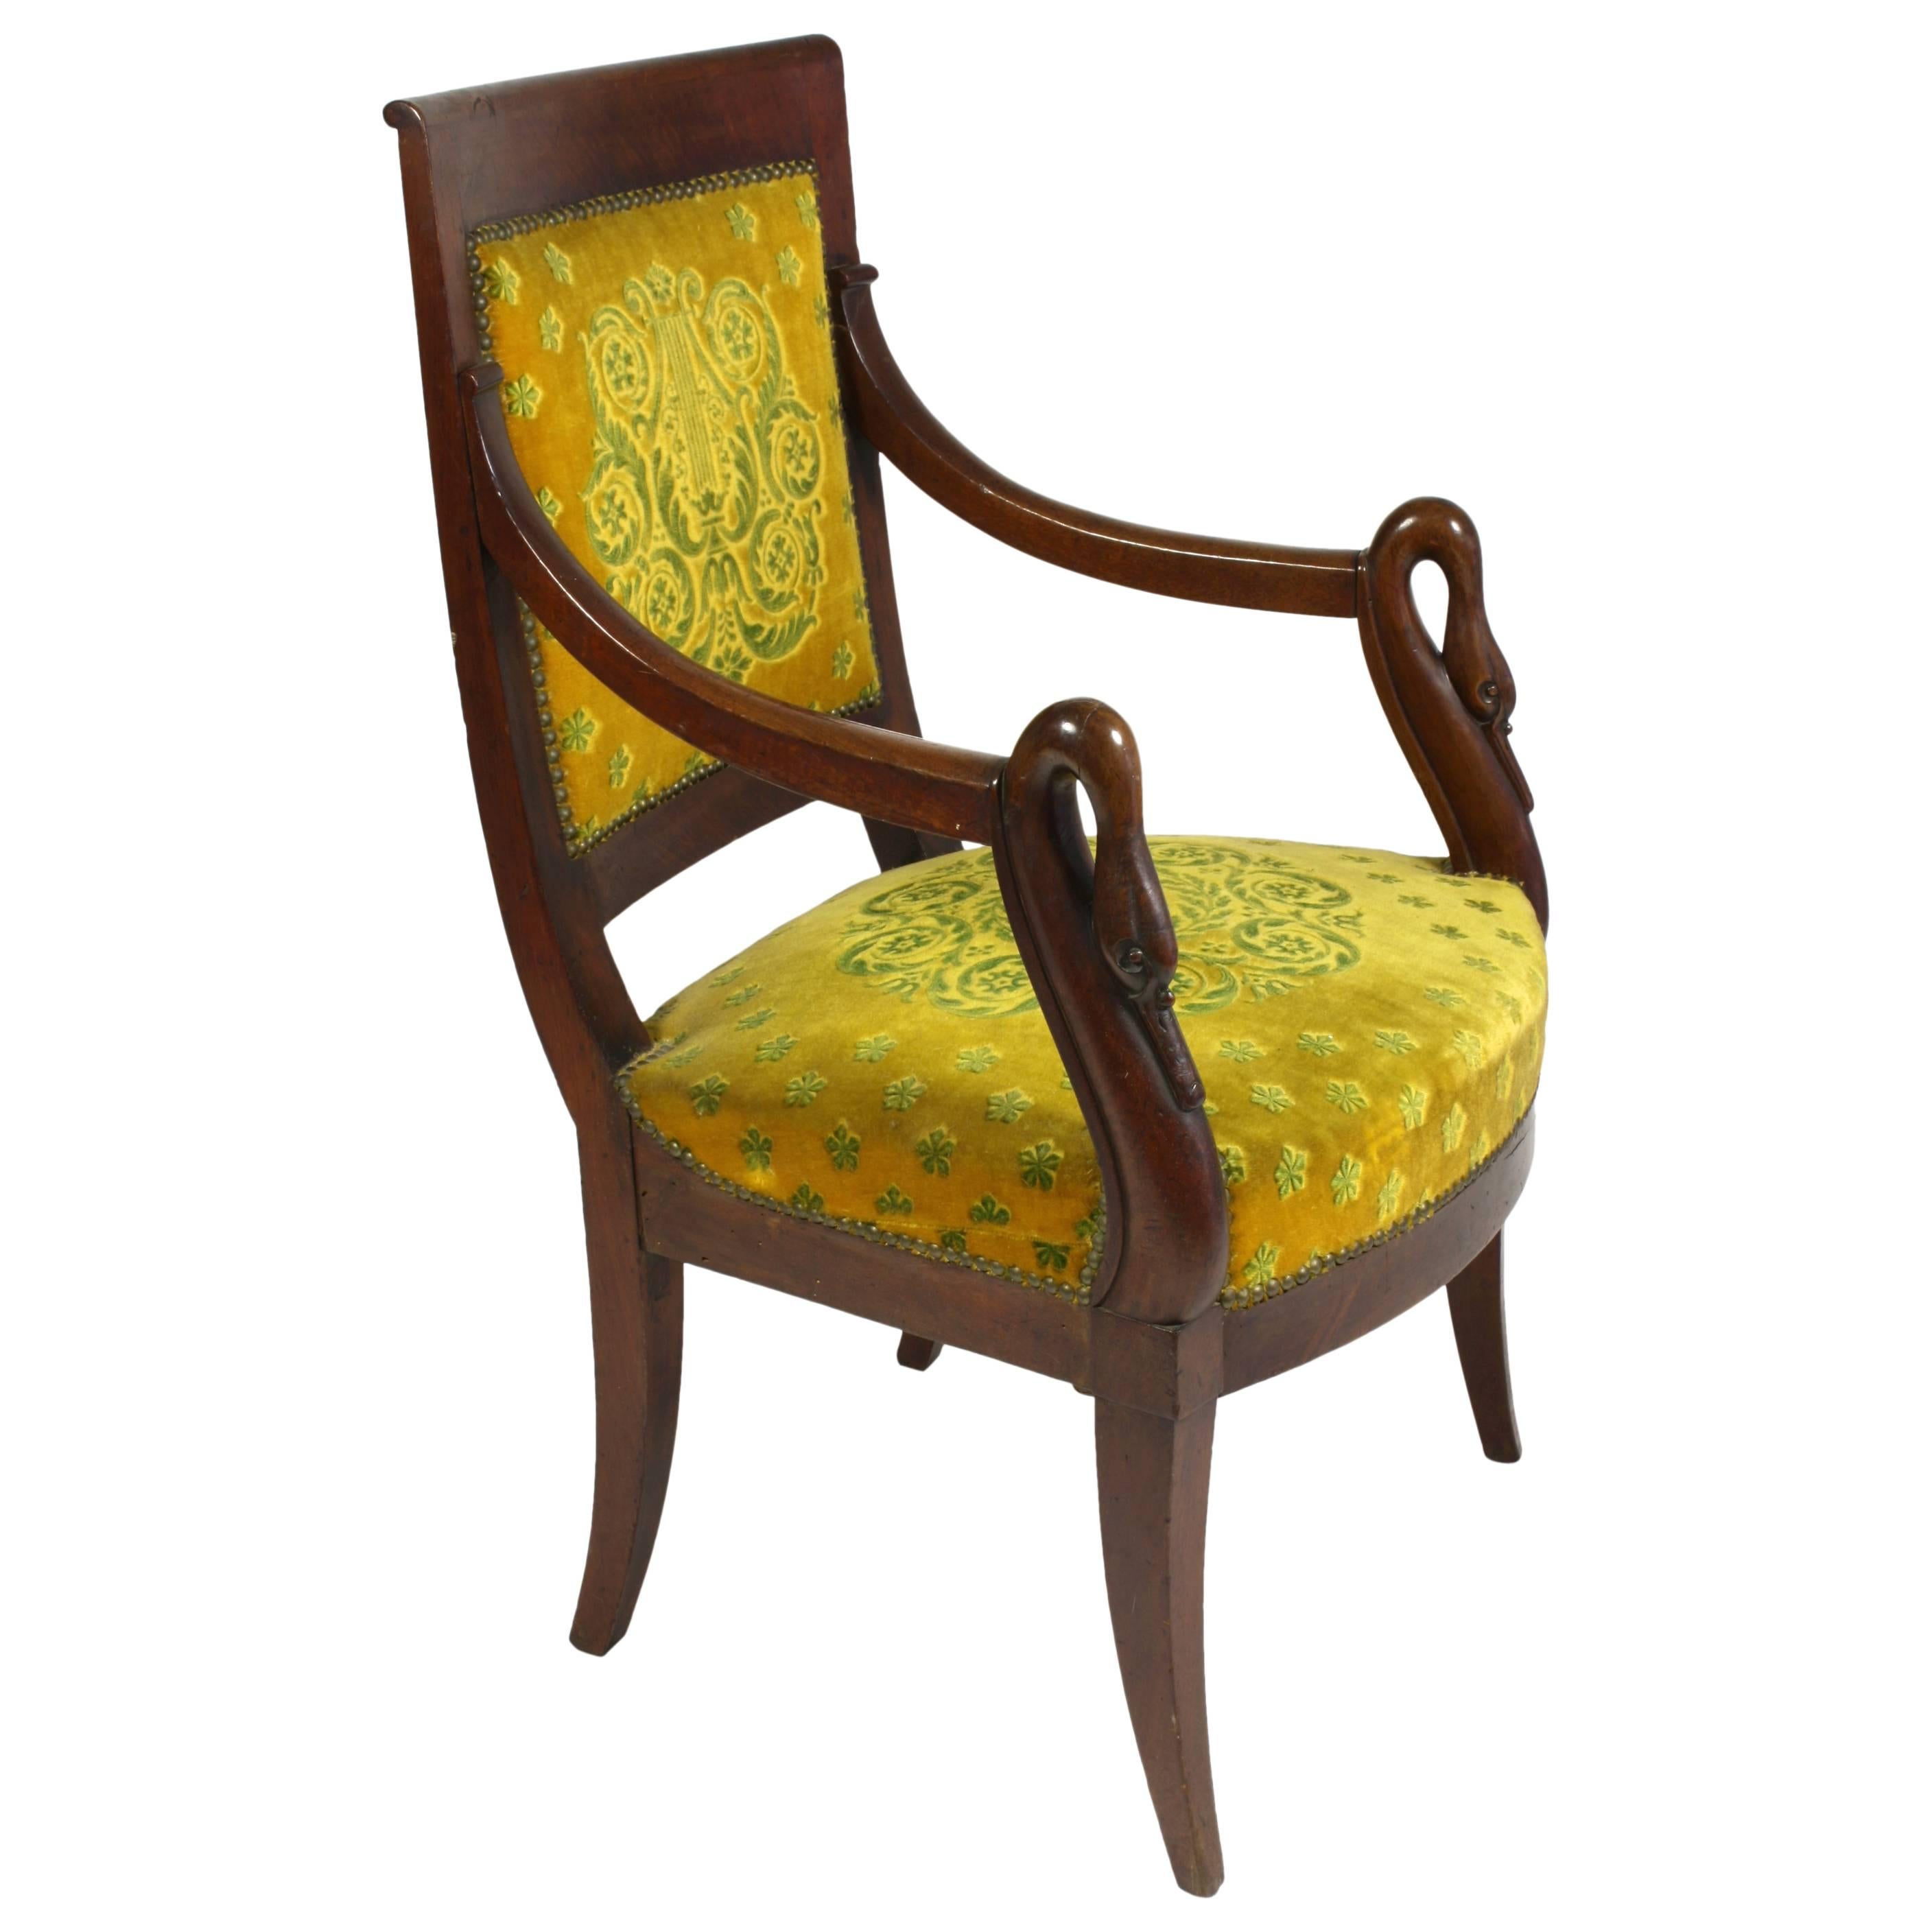 French Empire Period Mahogany Armchair with Swans' Heads